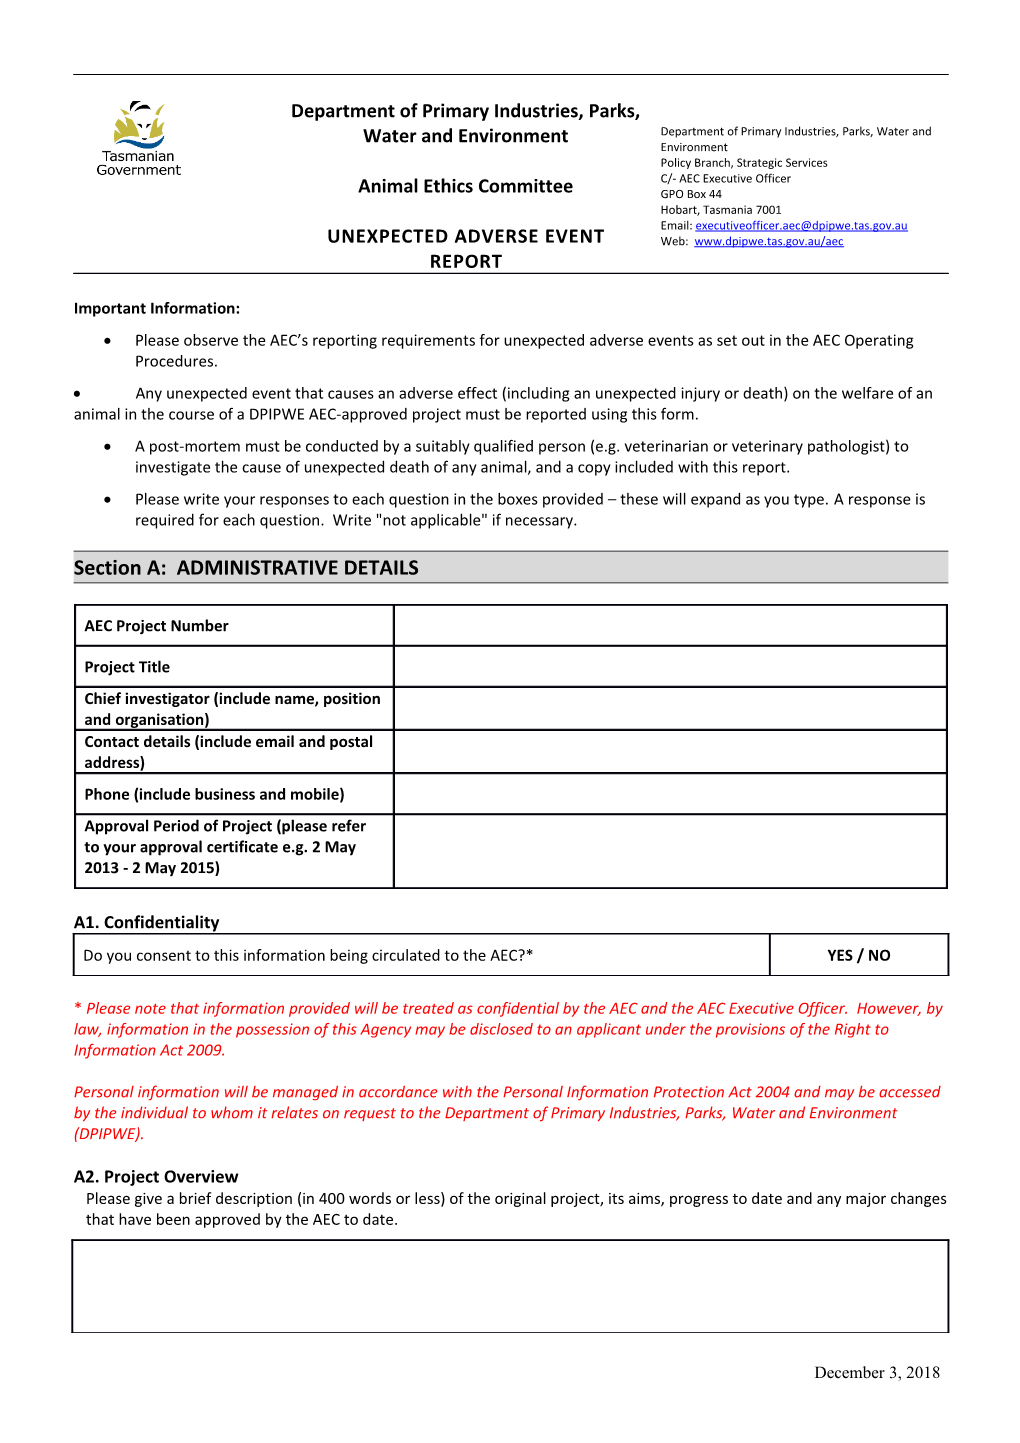 AEC Unexpected Adverse Event Report Form